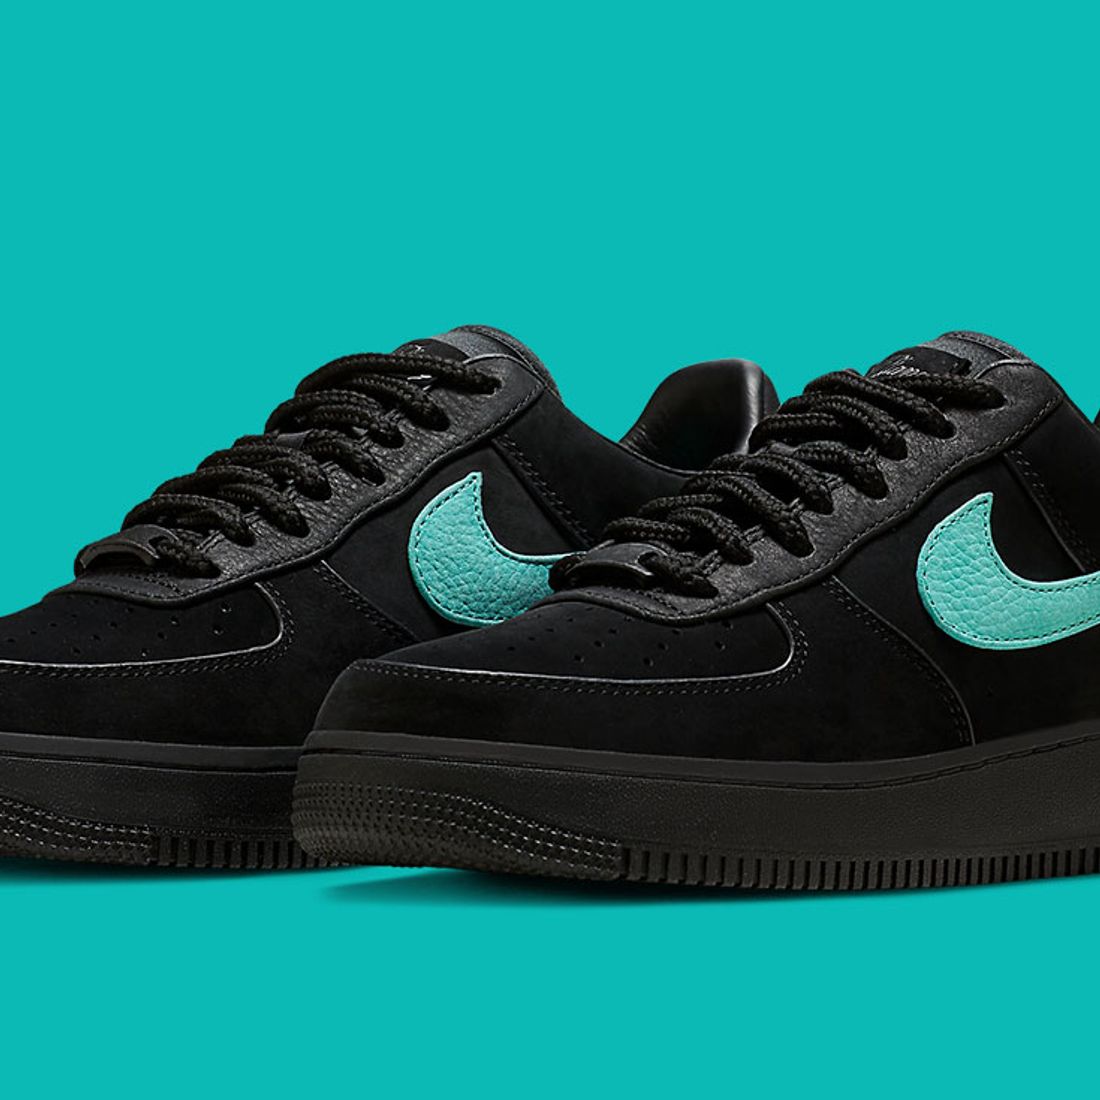 The Nike Air Force 1 Low NYC Is Releasing This Weekend